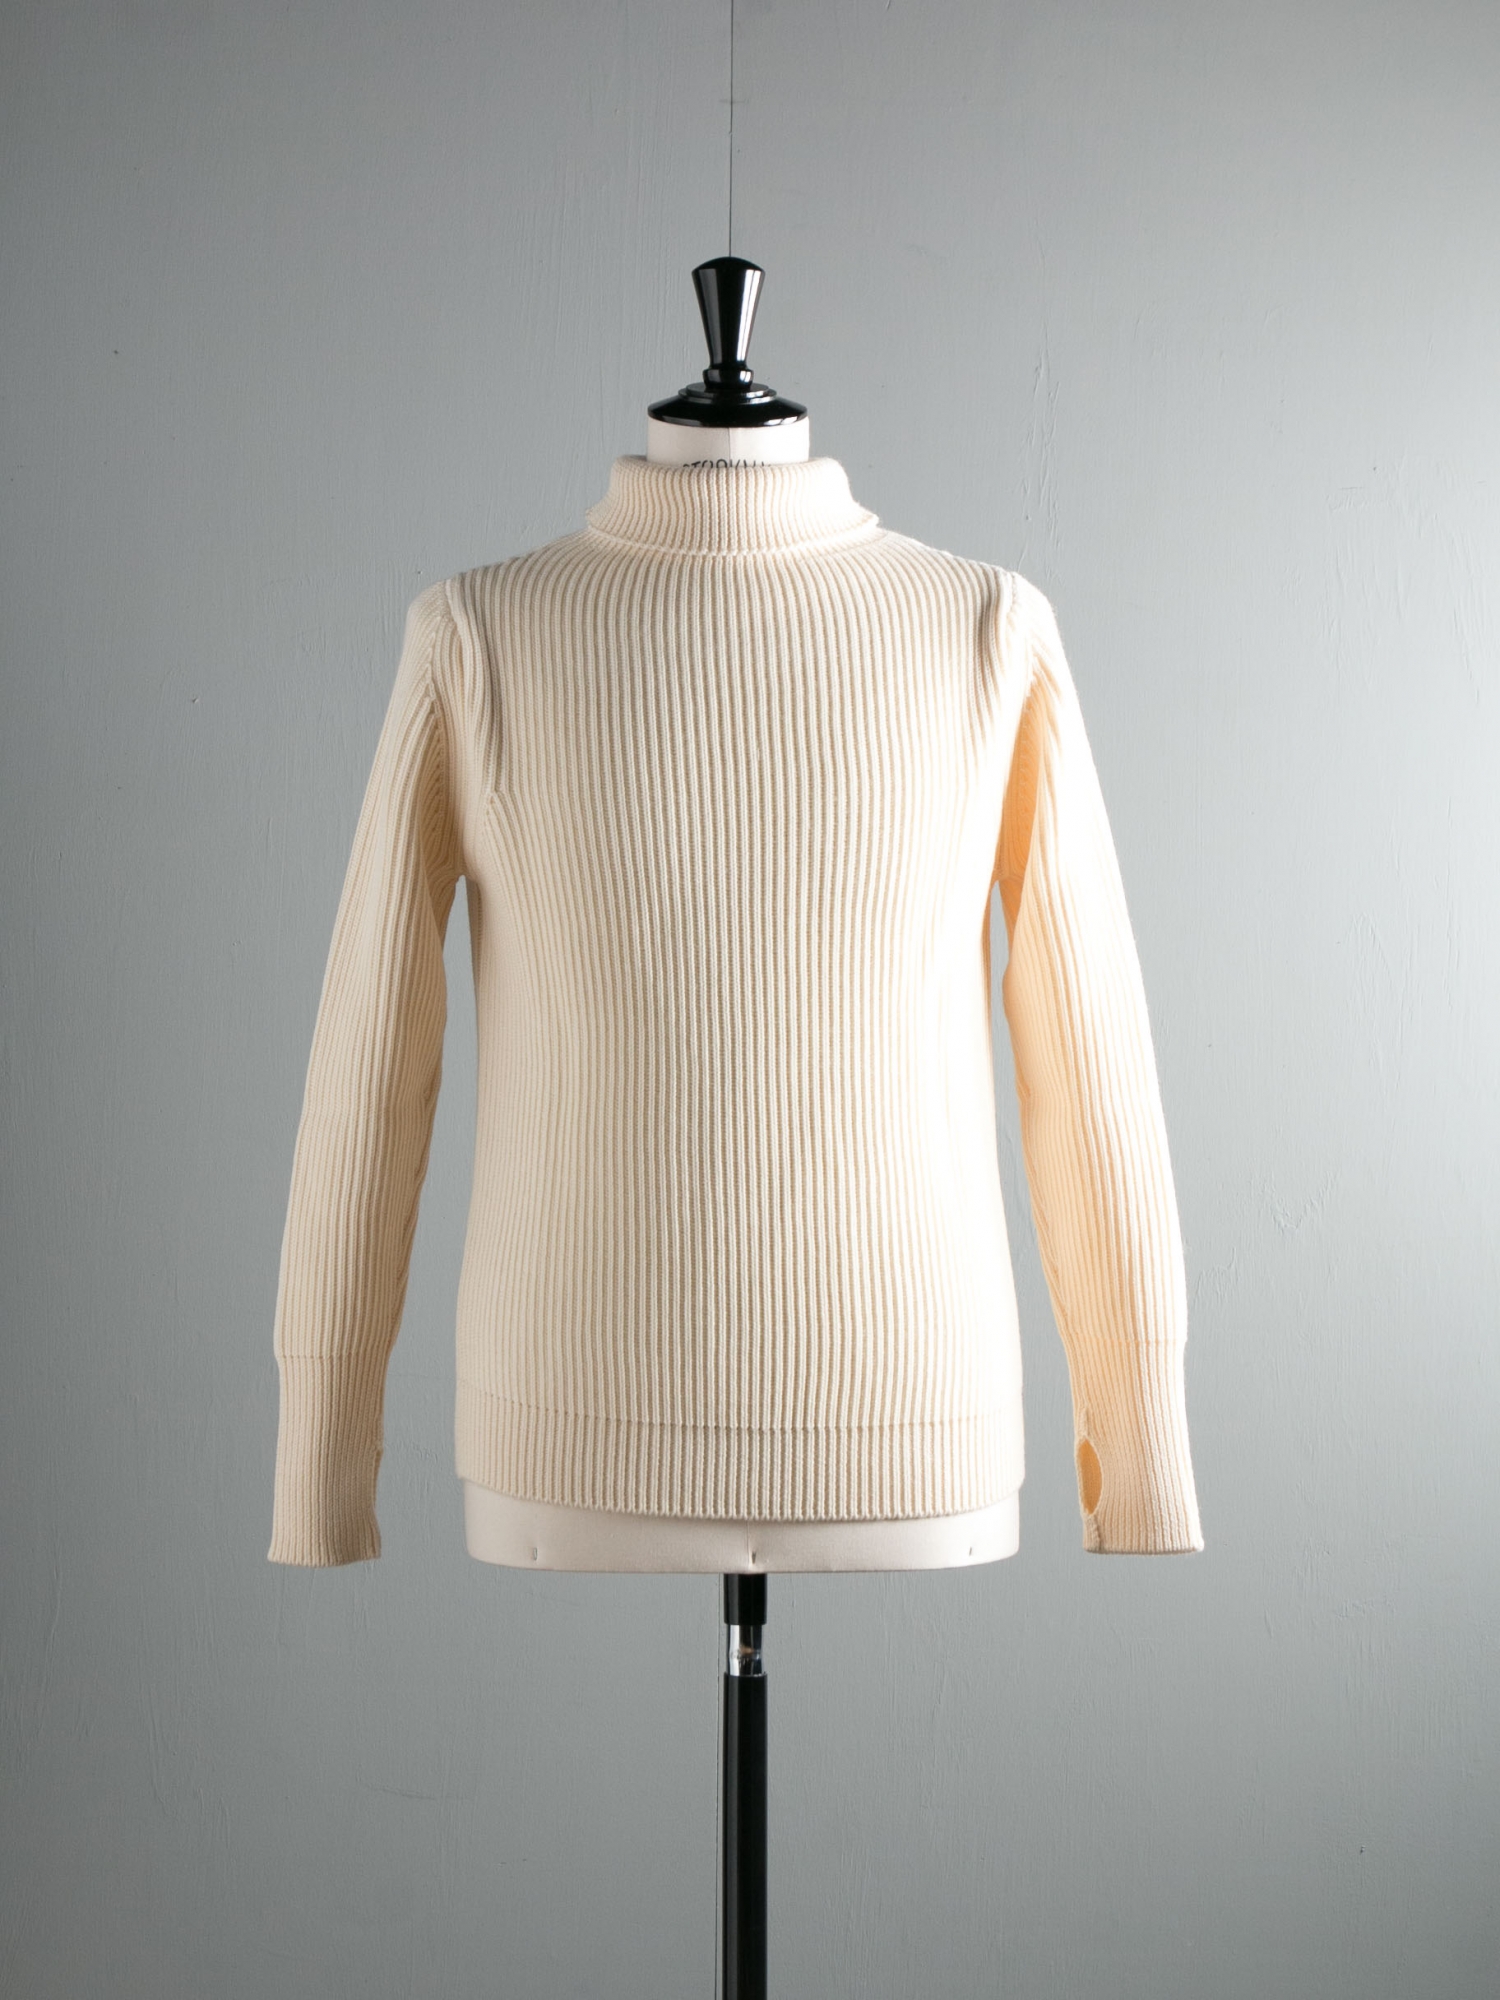 THE NAVY TURTLENECK Off White   Dresswell online store